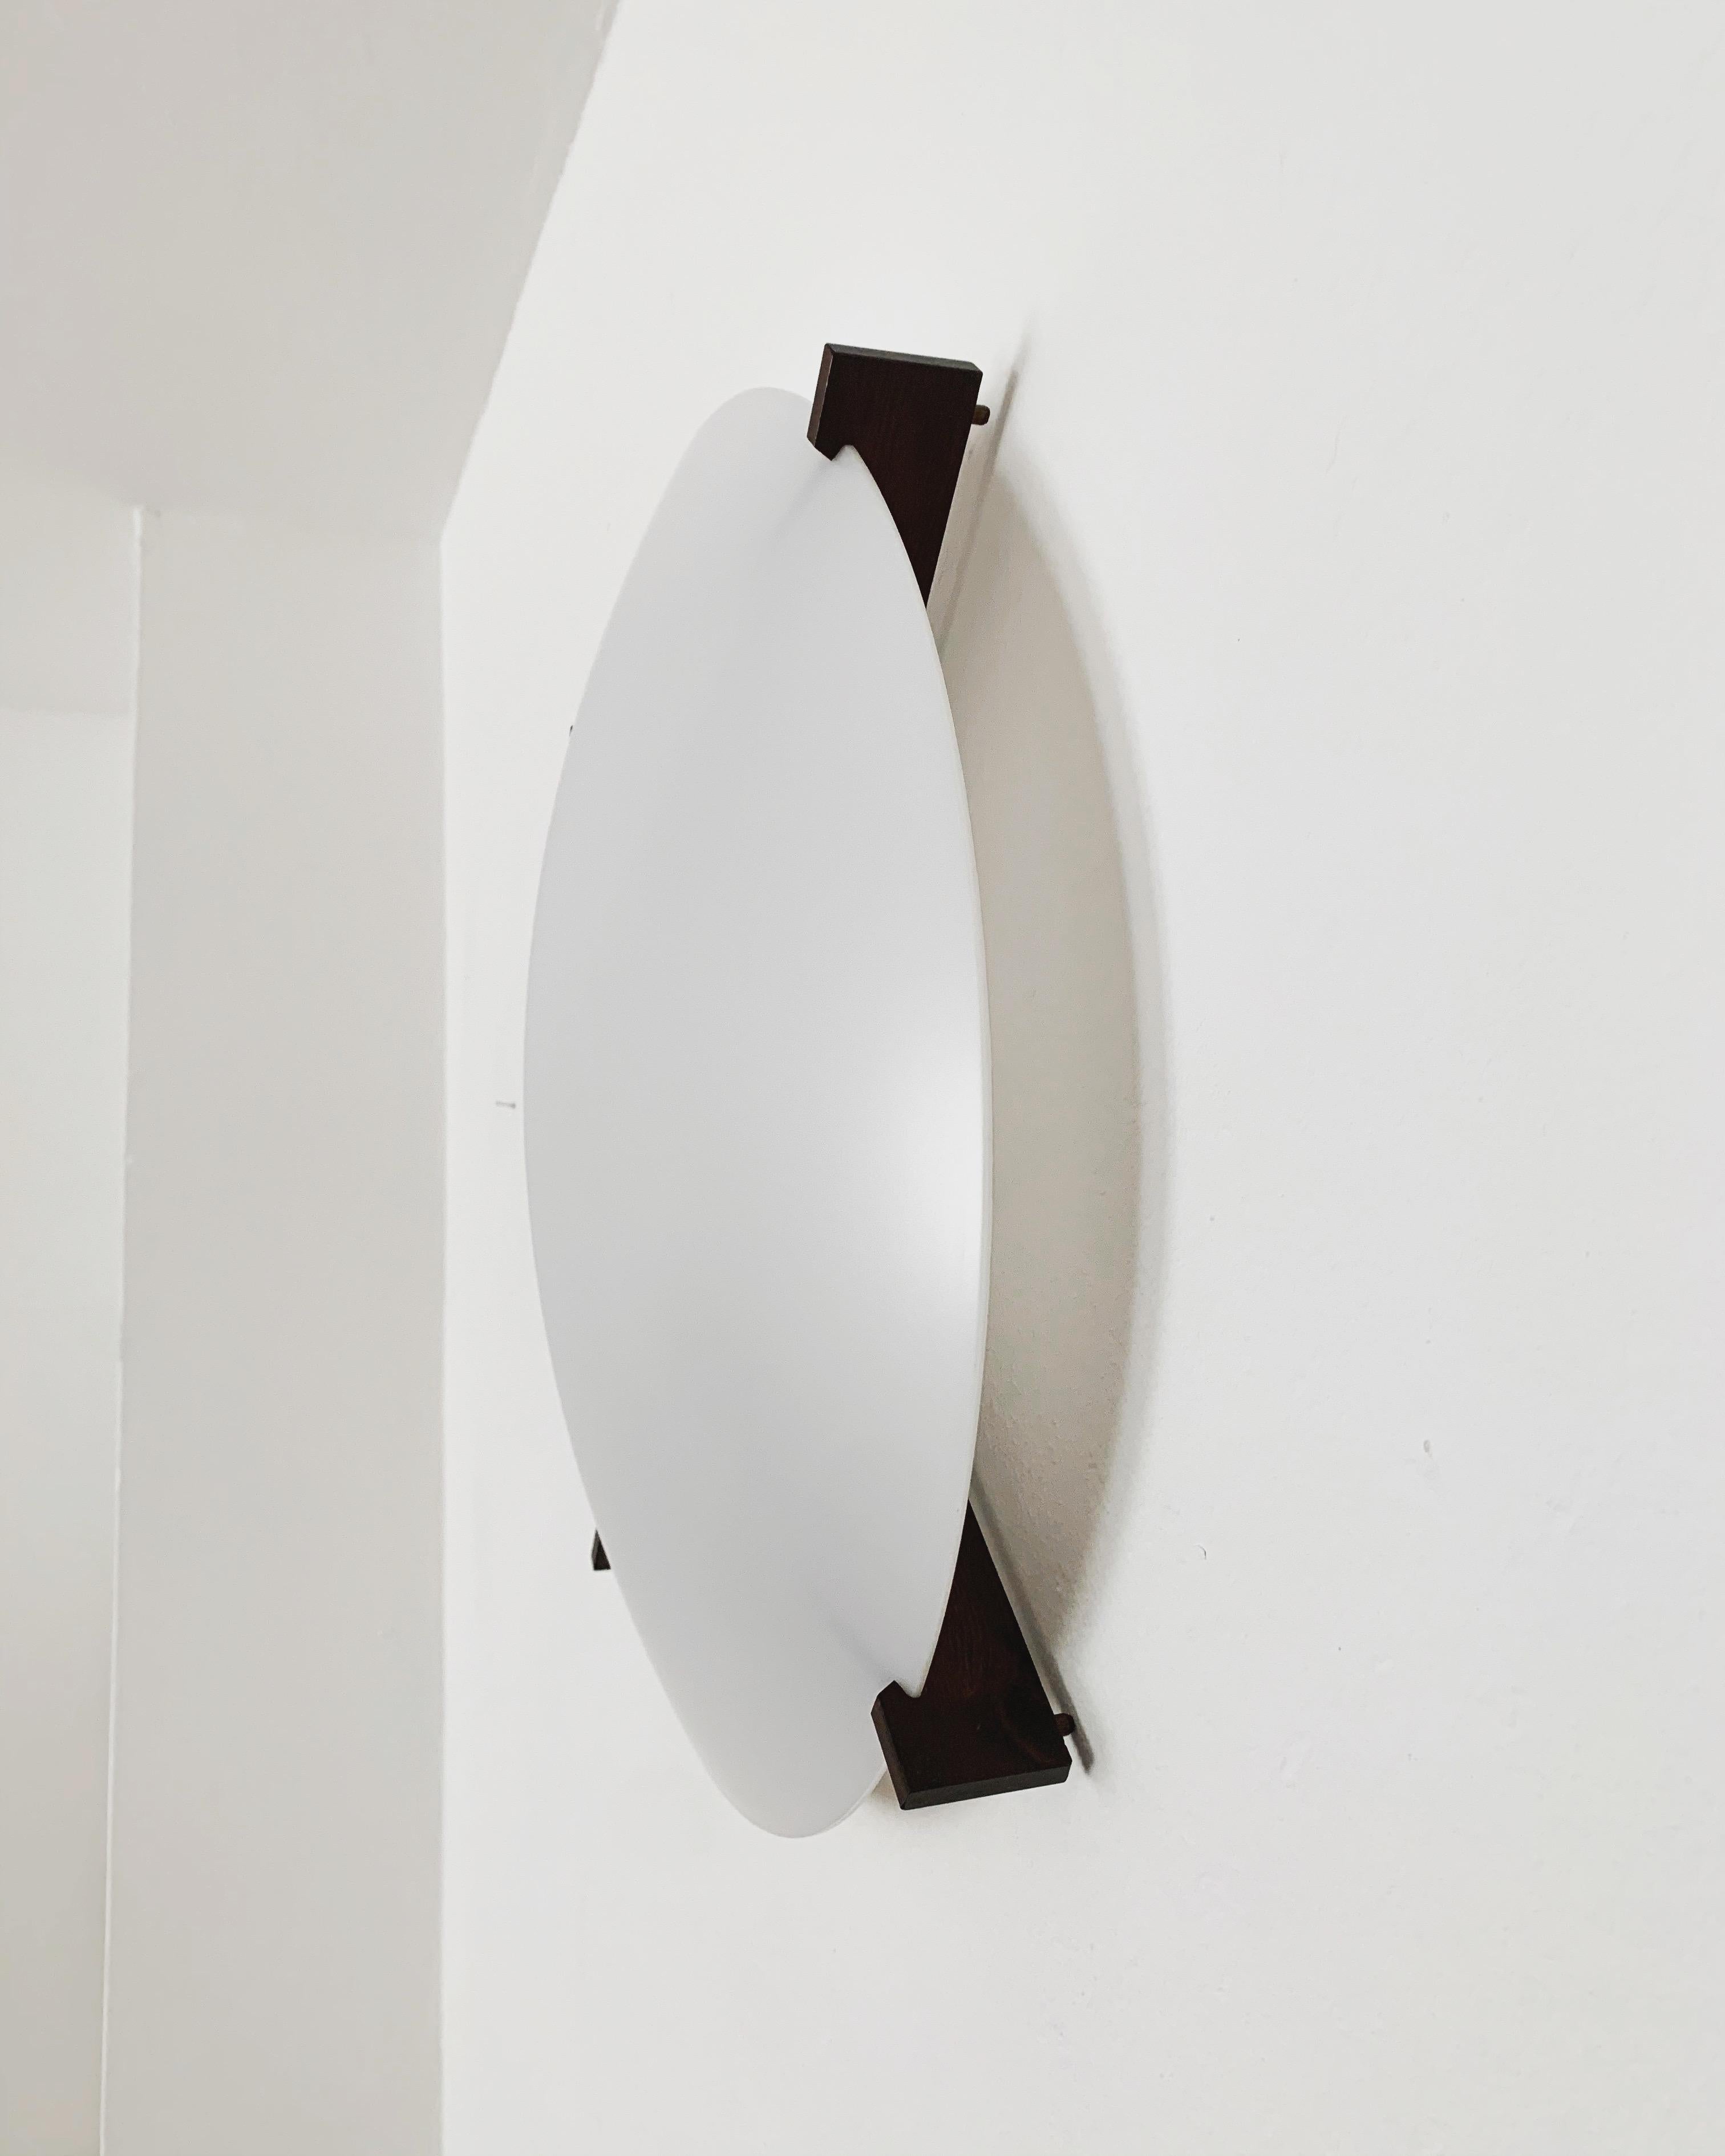  Wall Lamp or Flush Light by Uno and Östen Kristiansson for Luxus In Good Condition For Sale In München, DE